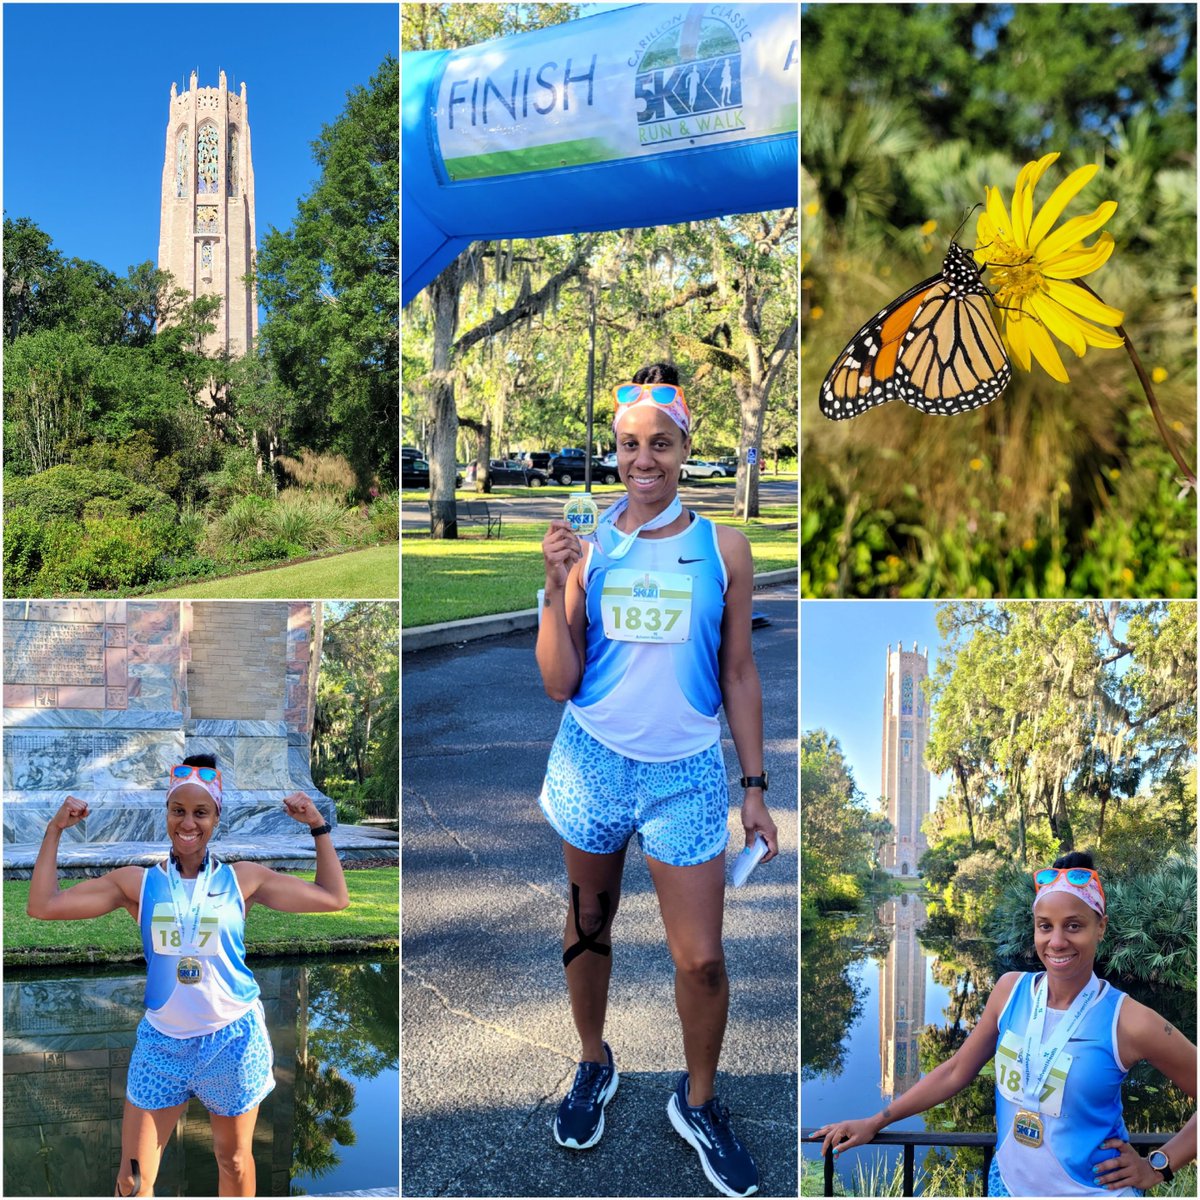 Crossed the finish line at the Carillon Classic 5K in 1st place for my age group! 🏃🏽‍♀️🥇 Feeling like a champion surrounded by nature's masterpiece. #CarillonClassic5K #BokTowerGardens #naturelover 🦋